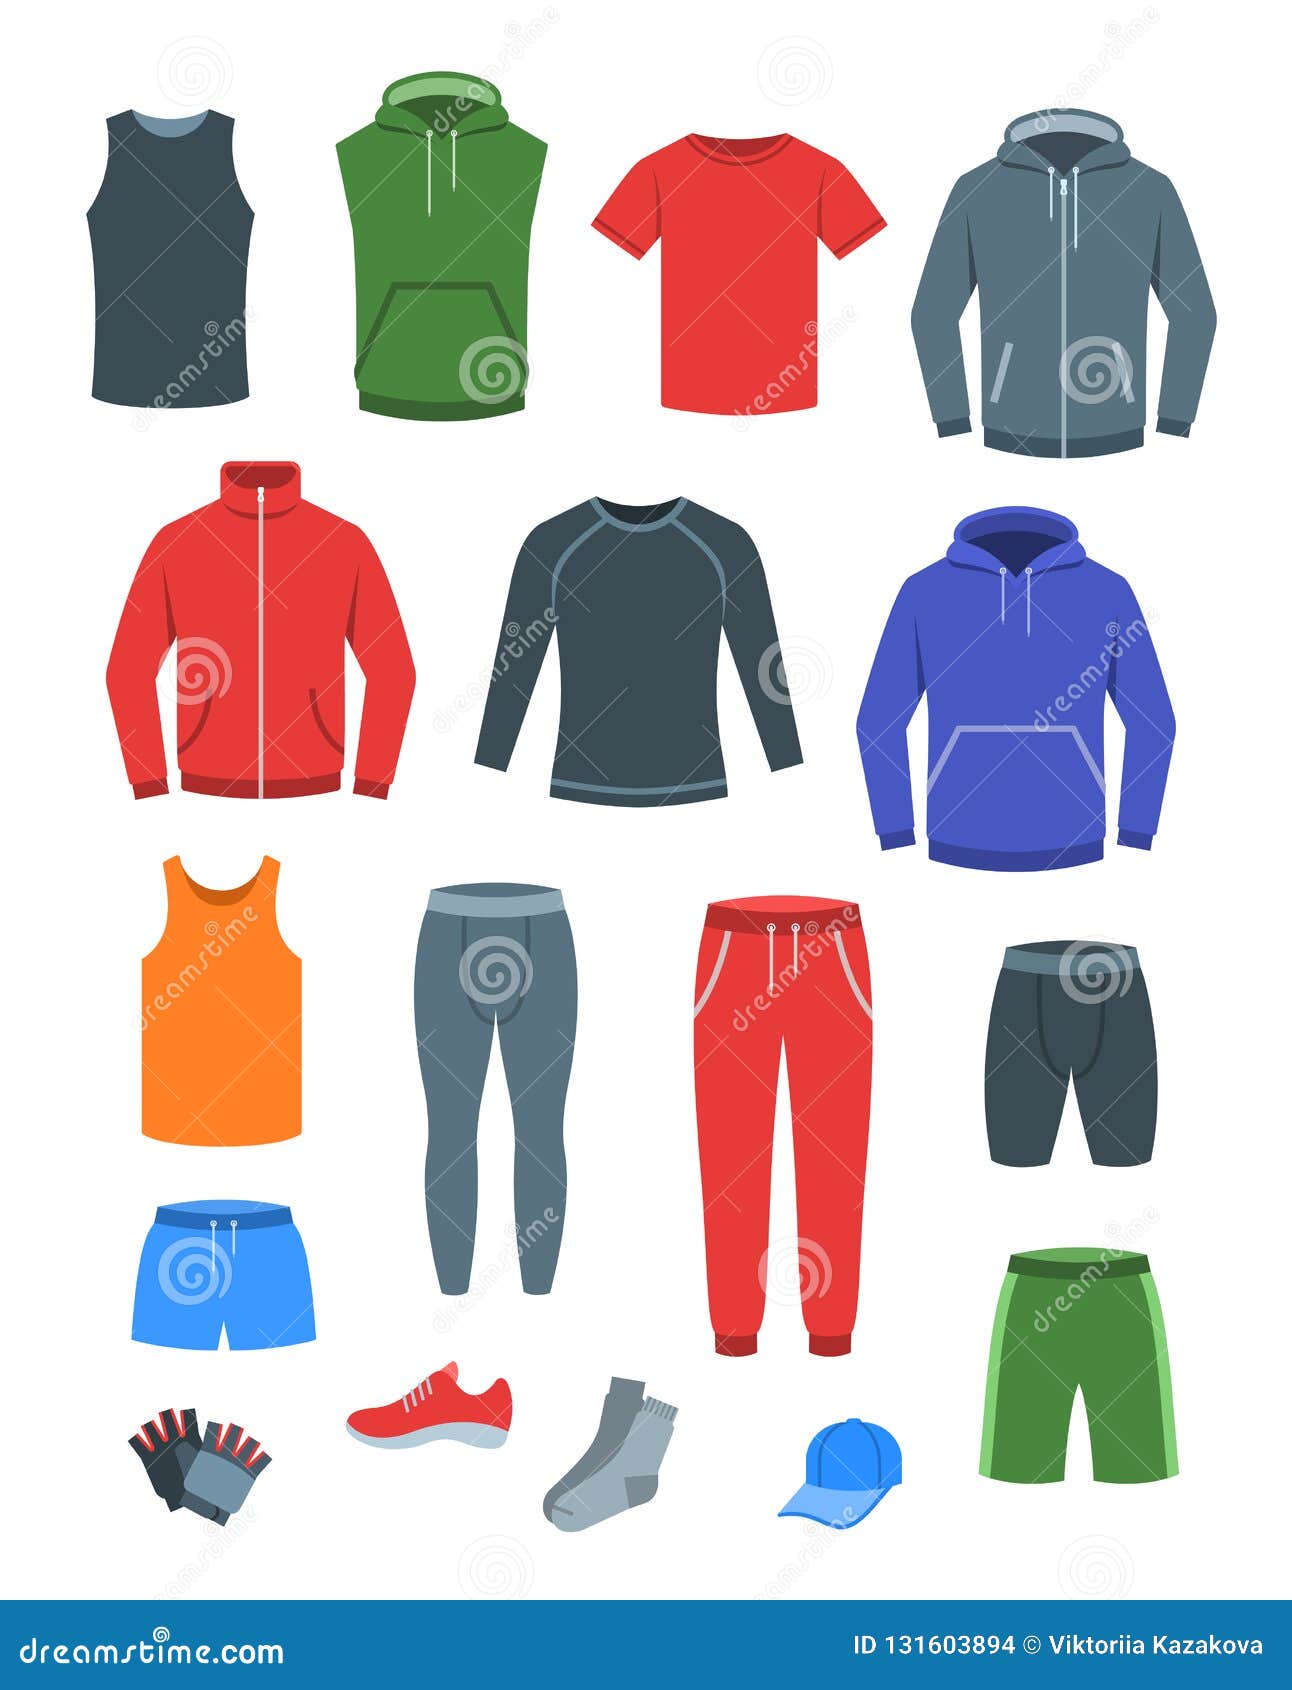 Men Casual Clothes for Fitness Training. Basic Garments for Gym